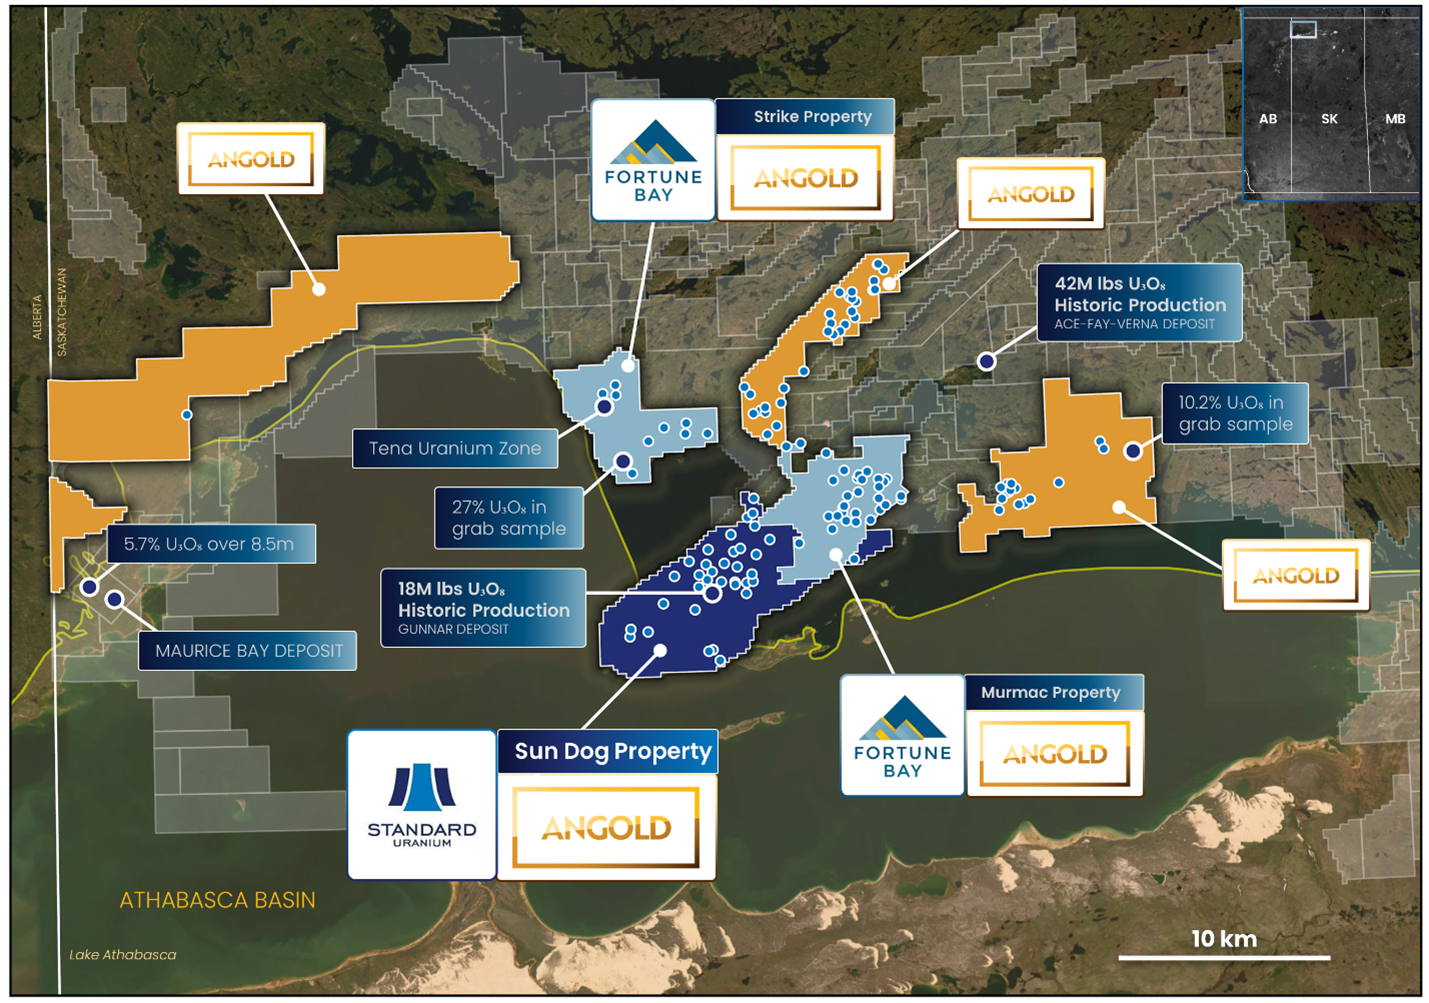 Overview of the Northwestern Athabasca Uranium District highlighting the Sun Dog Project and leading land position to be acquired by Angold Resources Ltd.